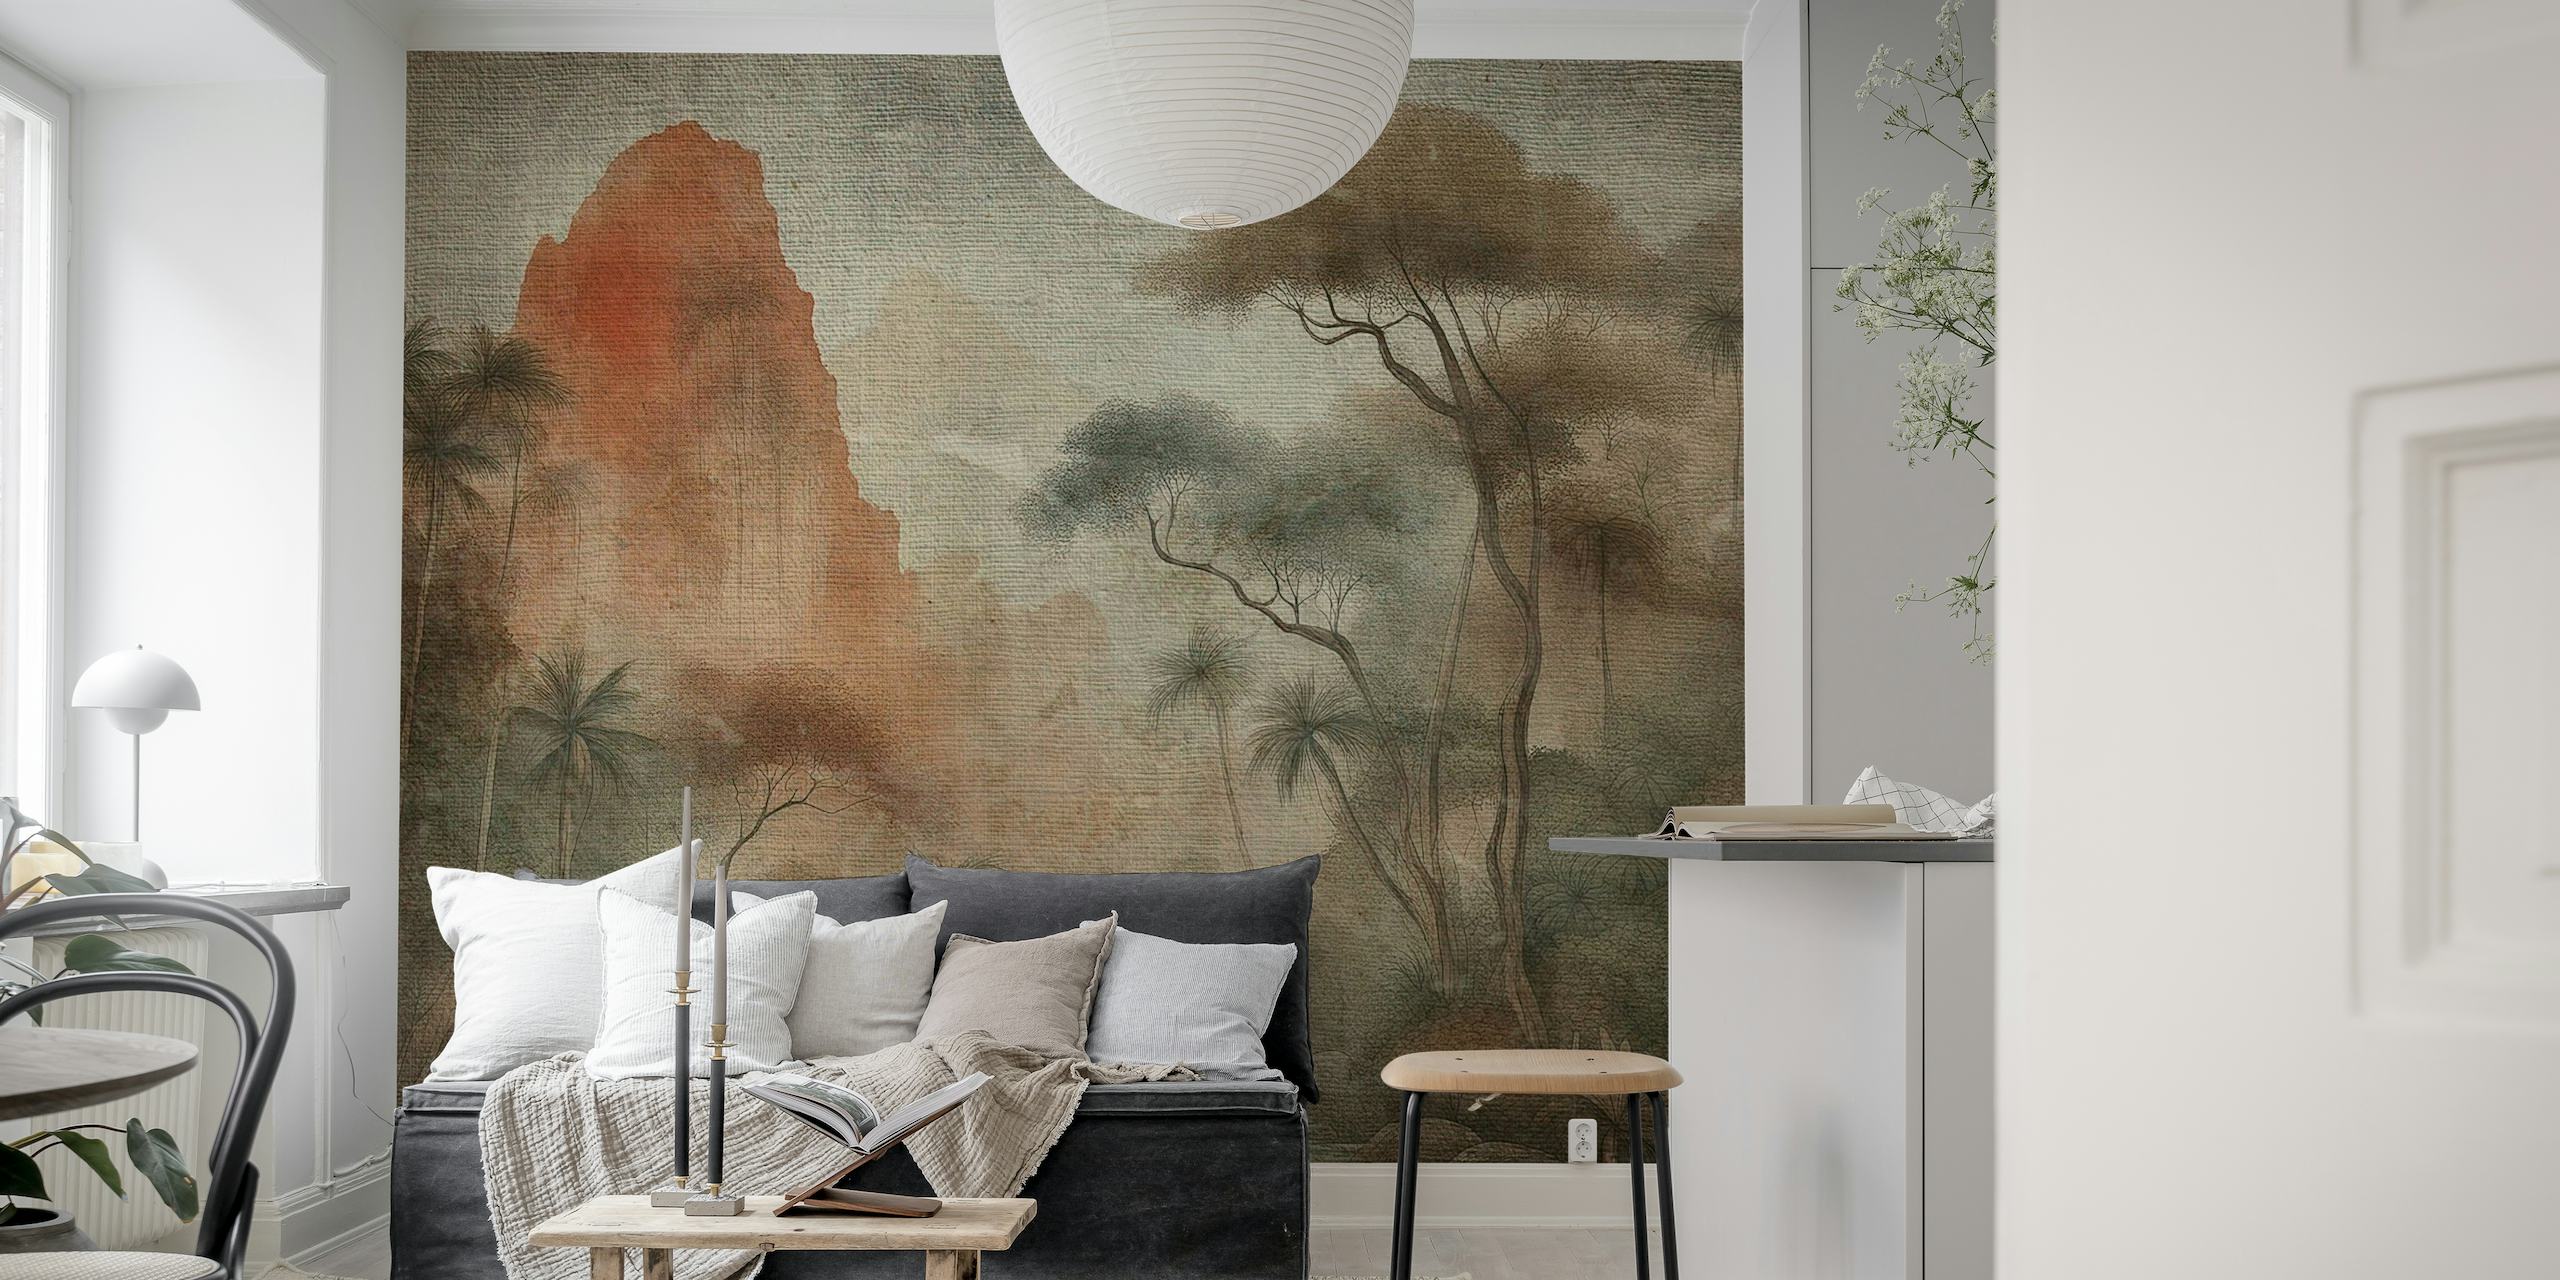 Vintage-style mural depicting an Asian jungle scene with towering trees and misty ambiance